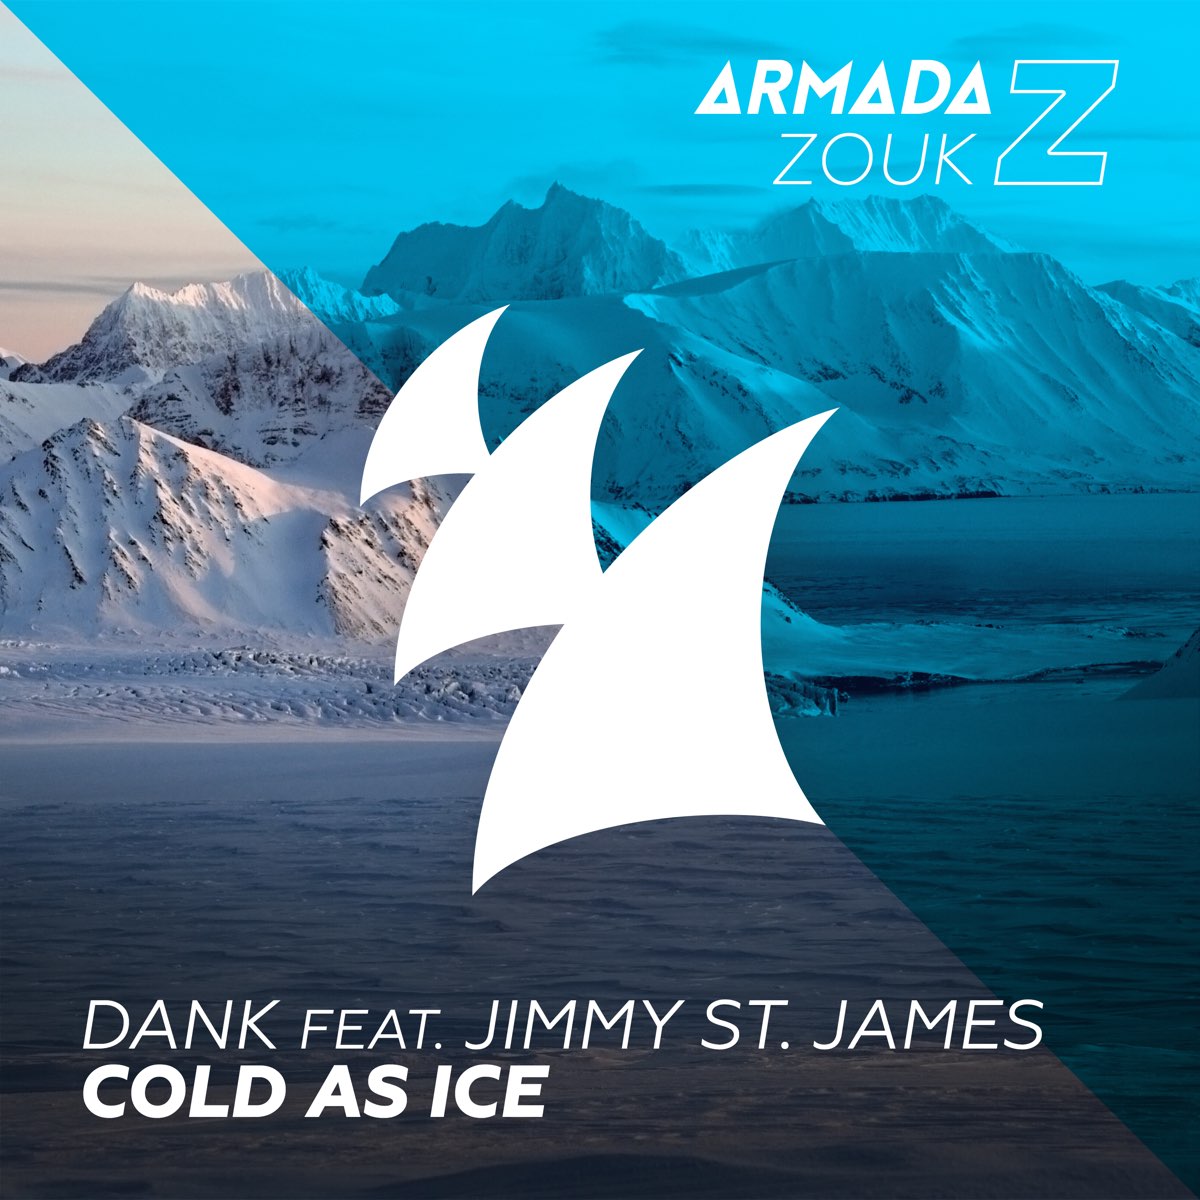 James cold. Armada Zouk. Armada Zouk 2016. Armada Zouk 2017. As Cold as Ice.